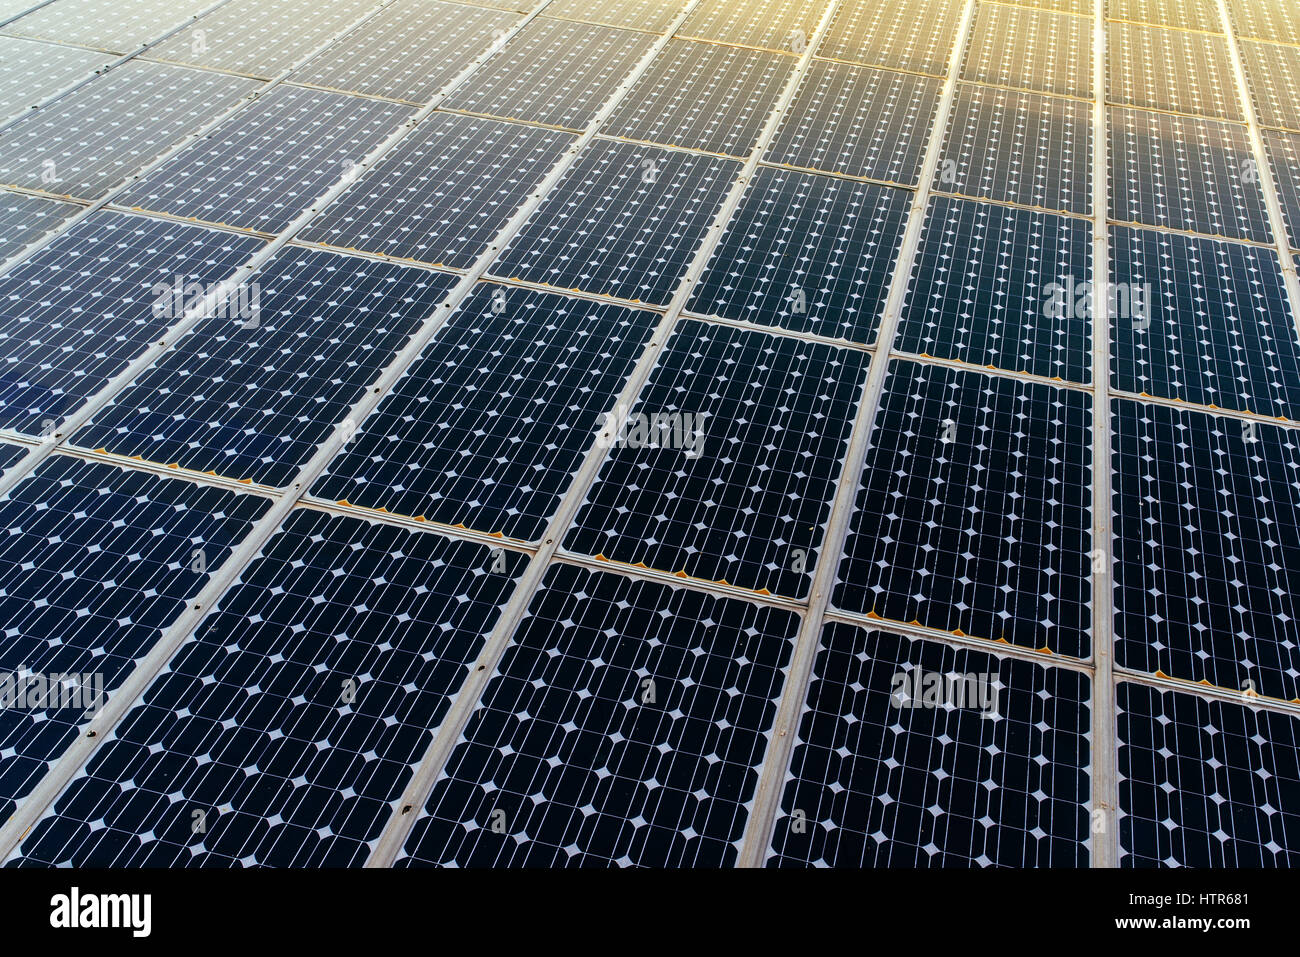 Solar panels surface, technology for renewable energy and power industry Stock Photo